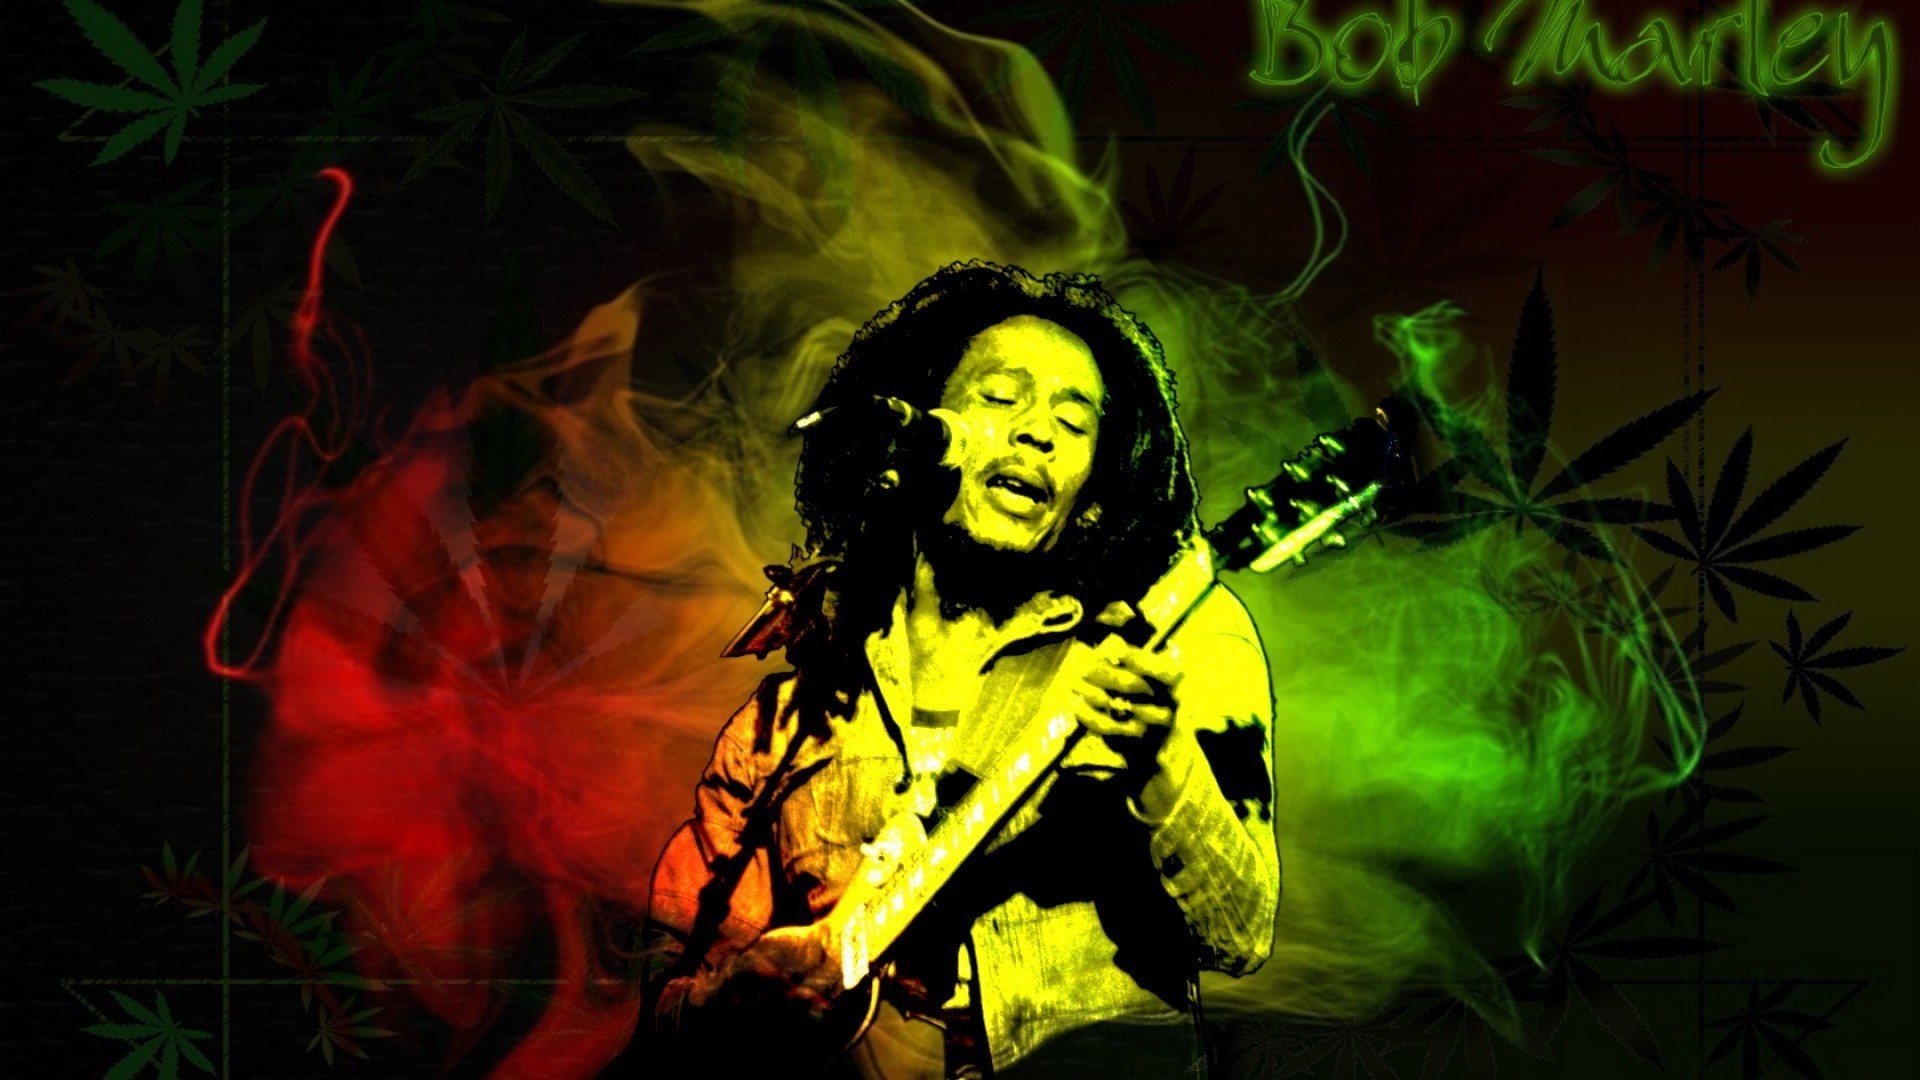 1920x1080 Cool Rasta Backgrounds 53 Images